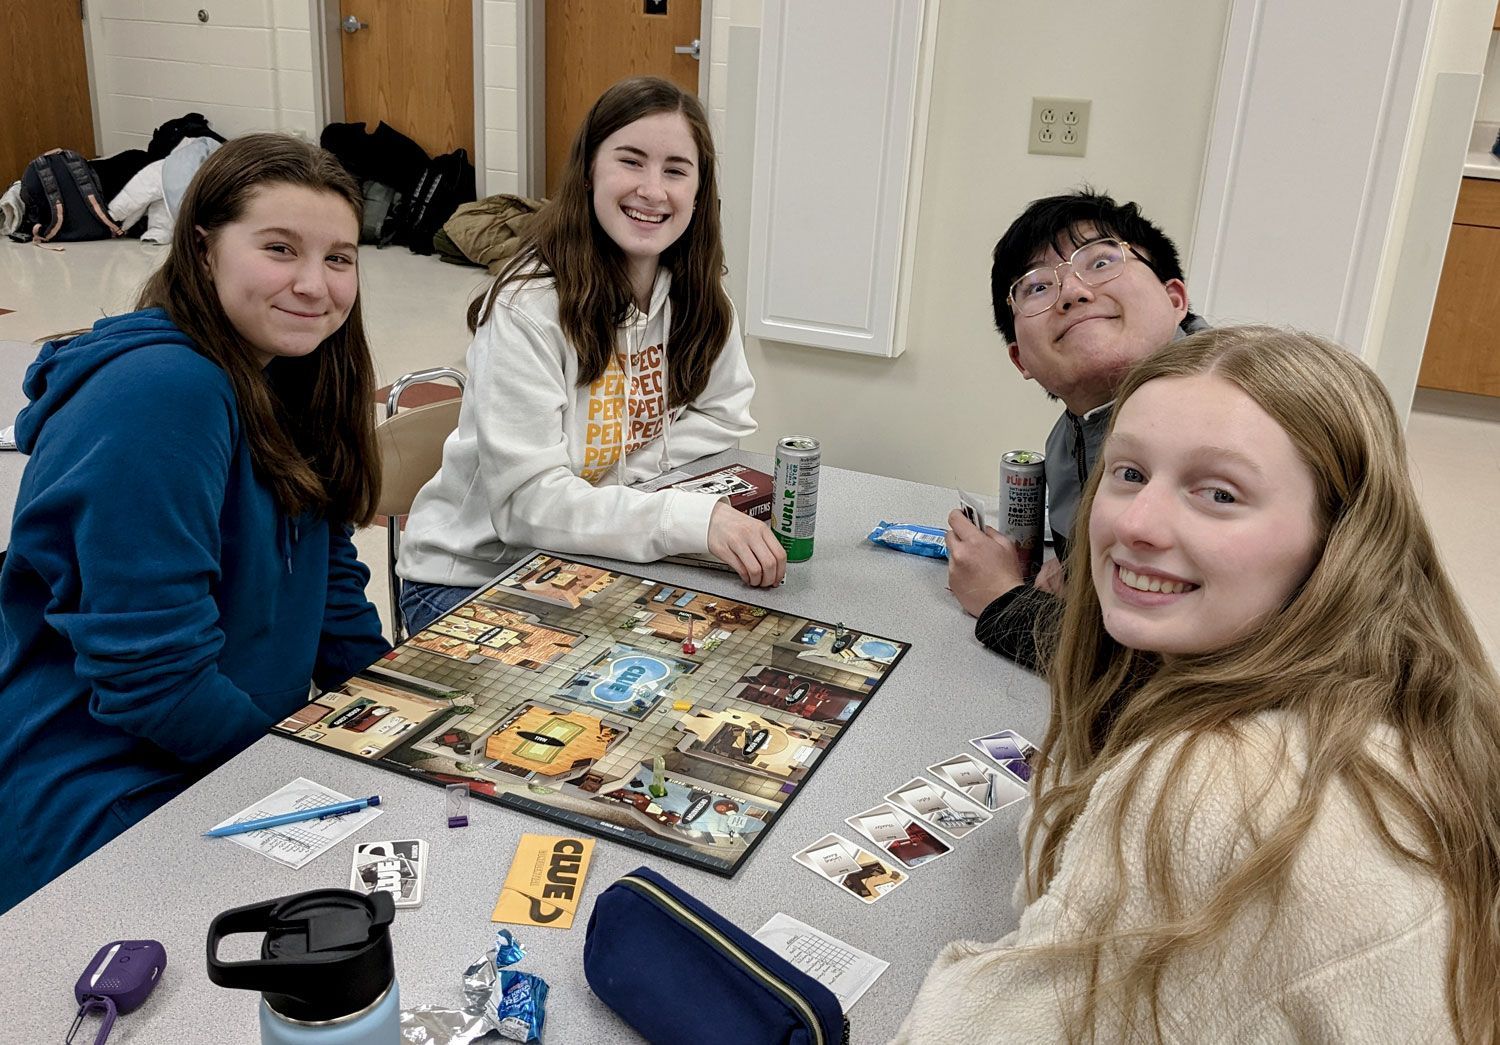 Three girls and one boy smiling at the camera while they sit at a table in a classroom, playing a board game